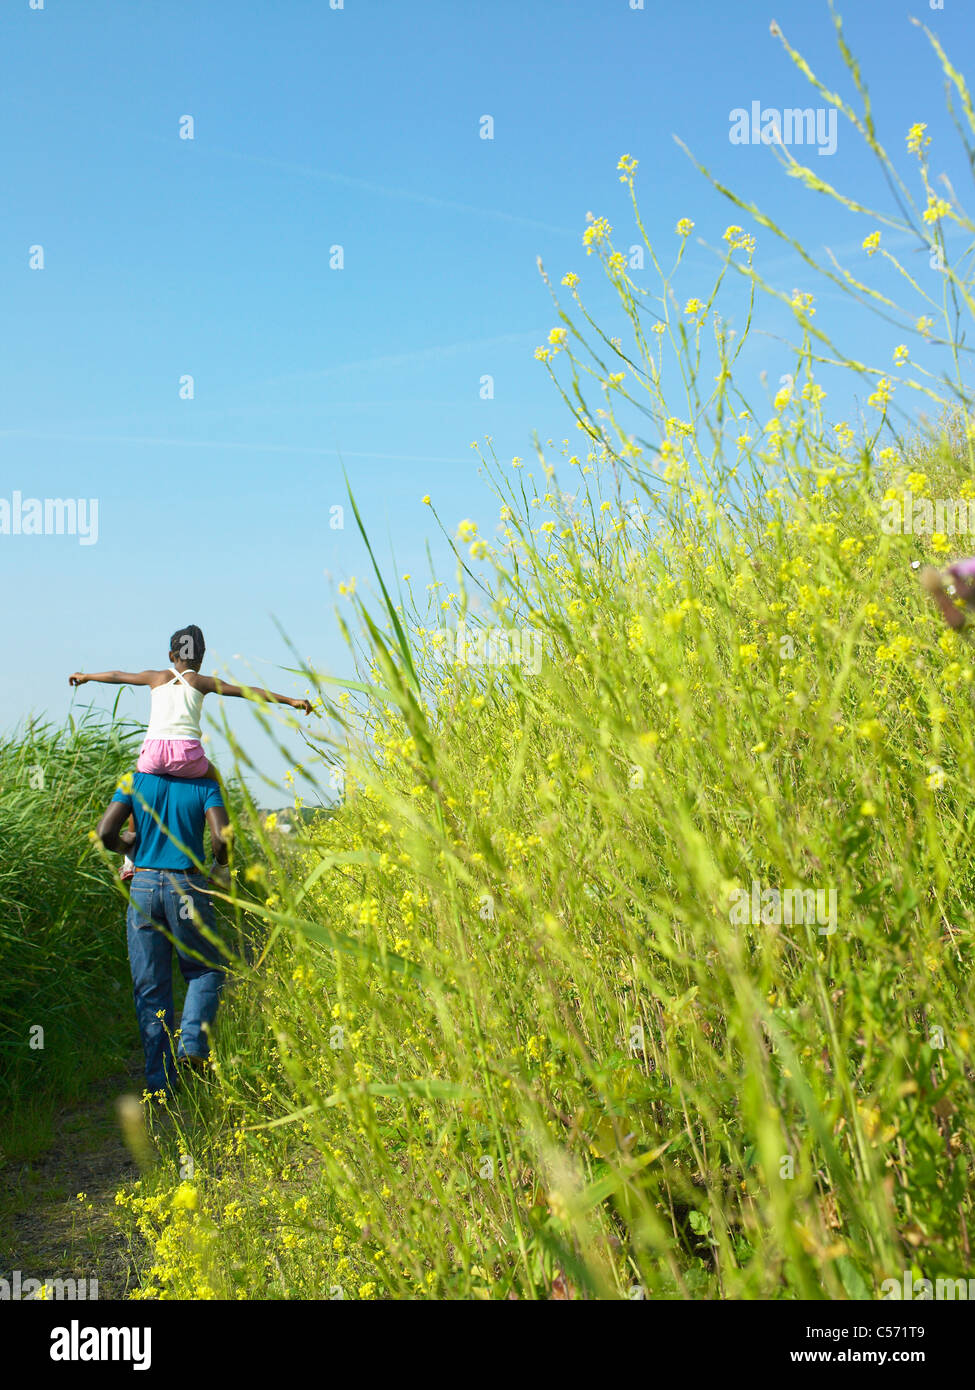 Daughter on father’s shoulders in field Stock Photo